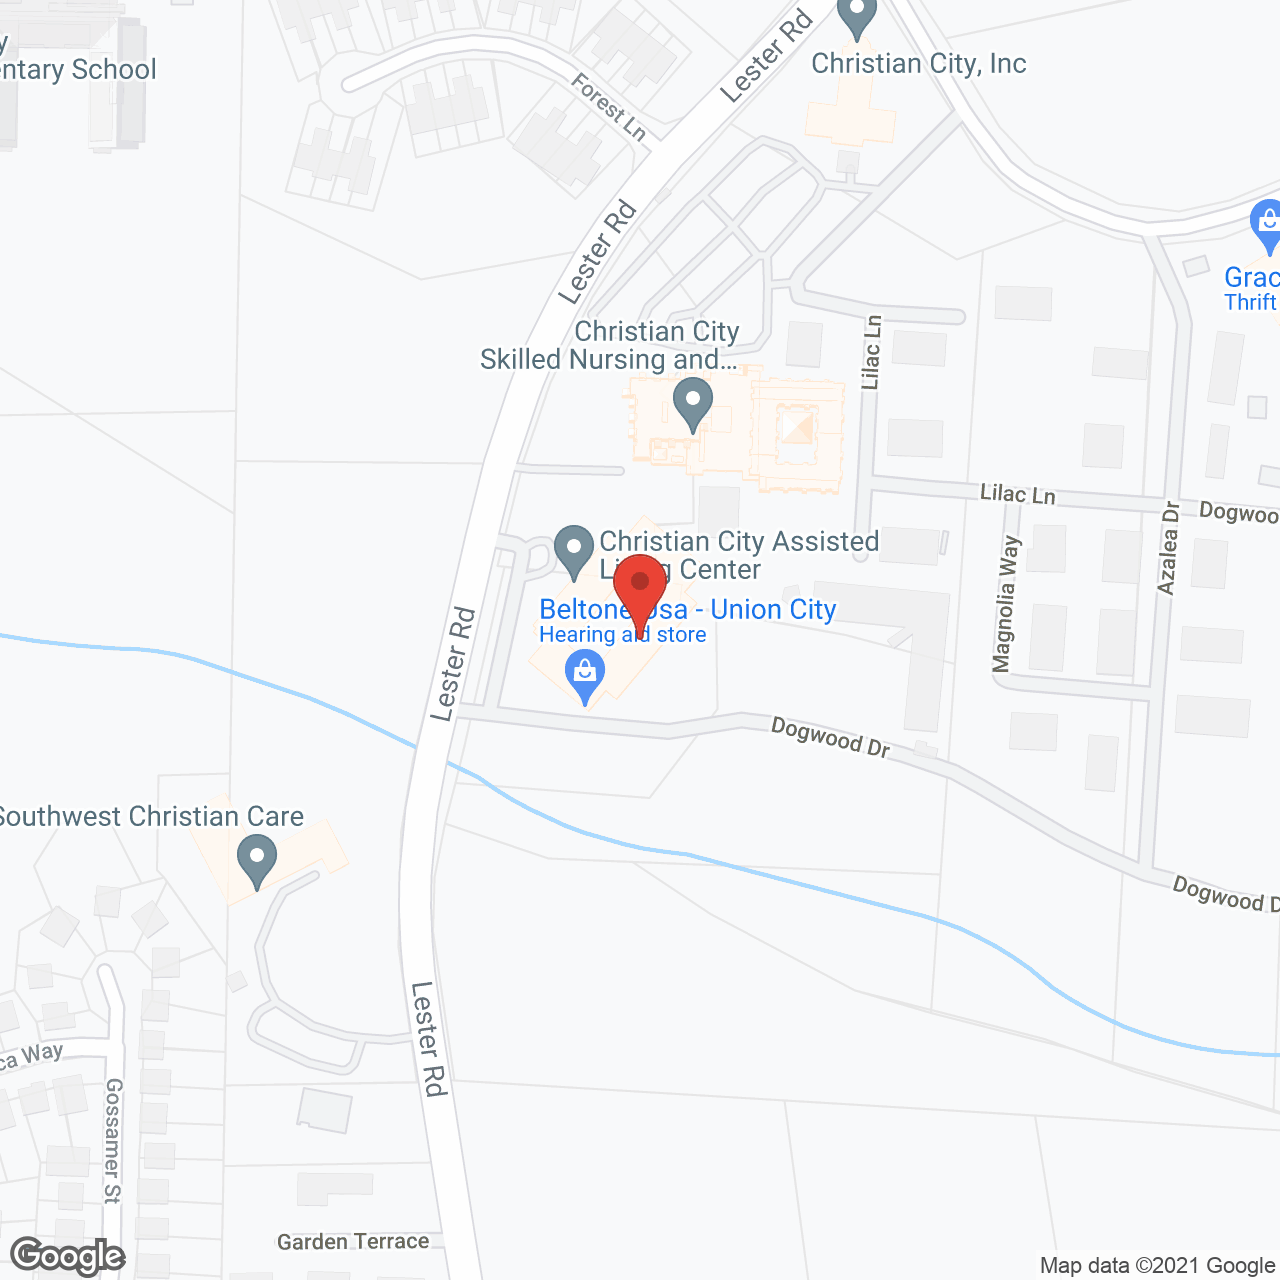 Christian City Assisted Living Center in google map